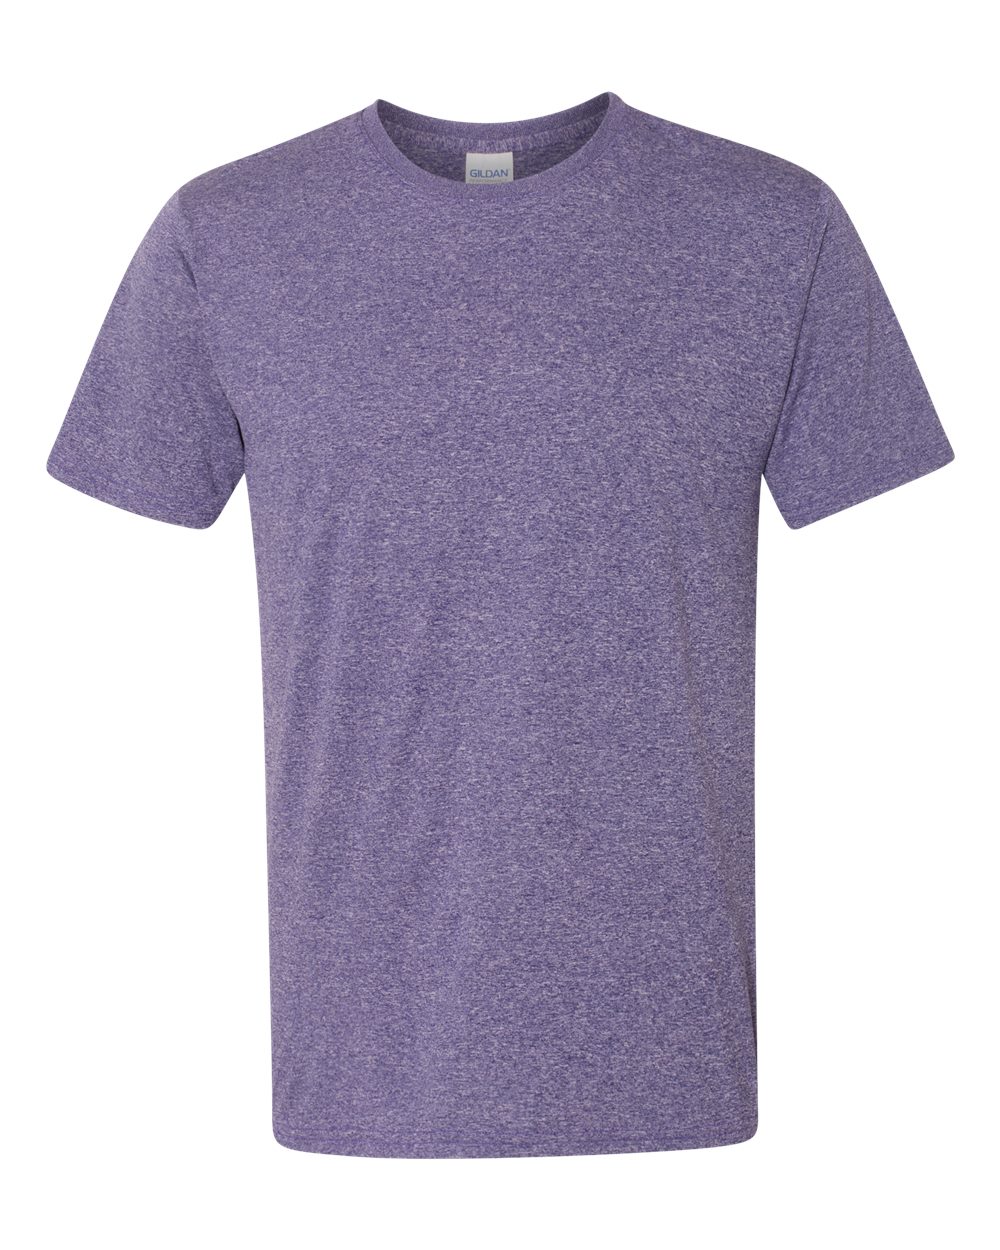 click to view Heather Sport Purple